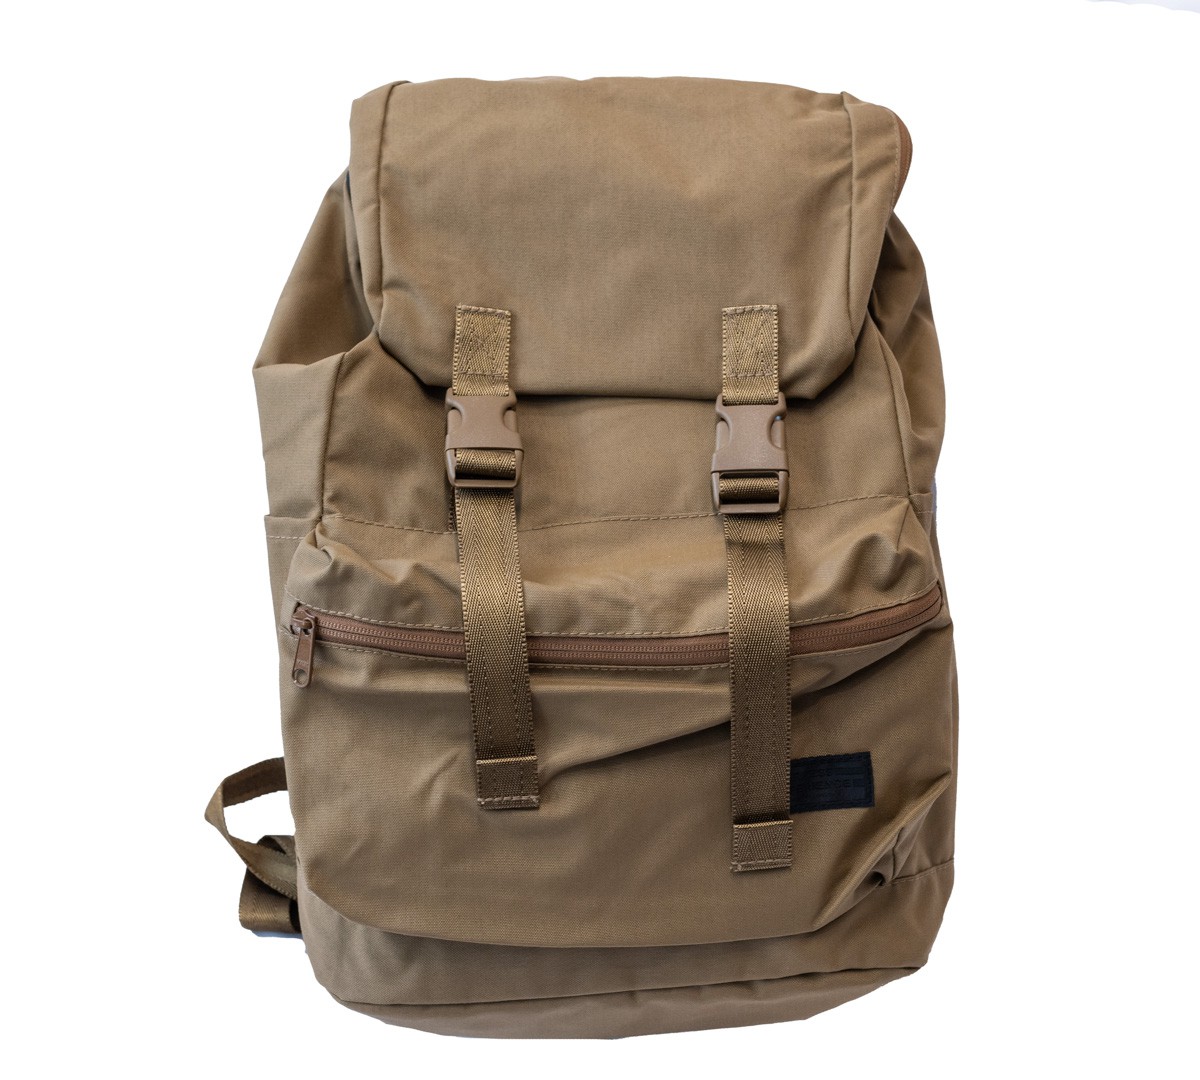 Wilderness Experience 日本製造 Day Trip Backpack 超輕背囊 雙肩背包 Coyote 棕色